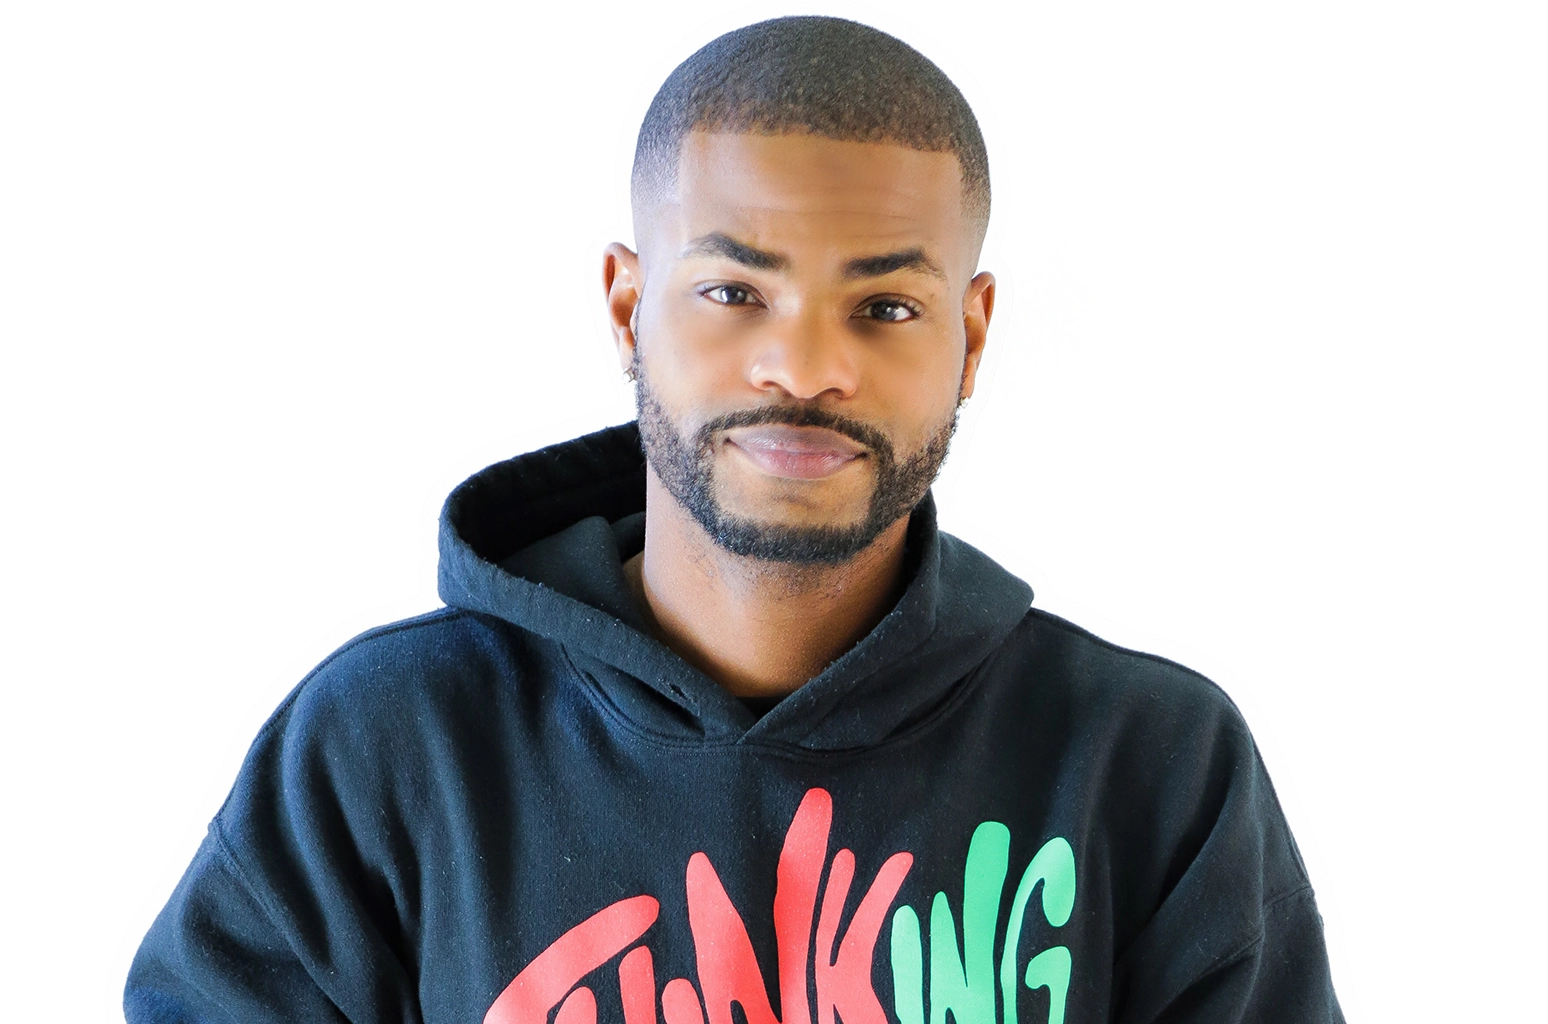 King Bach mocked Andrew Tate's arrest